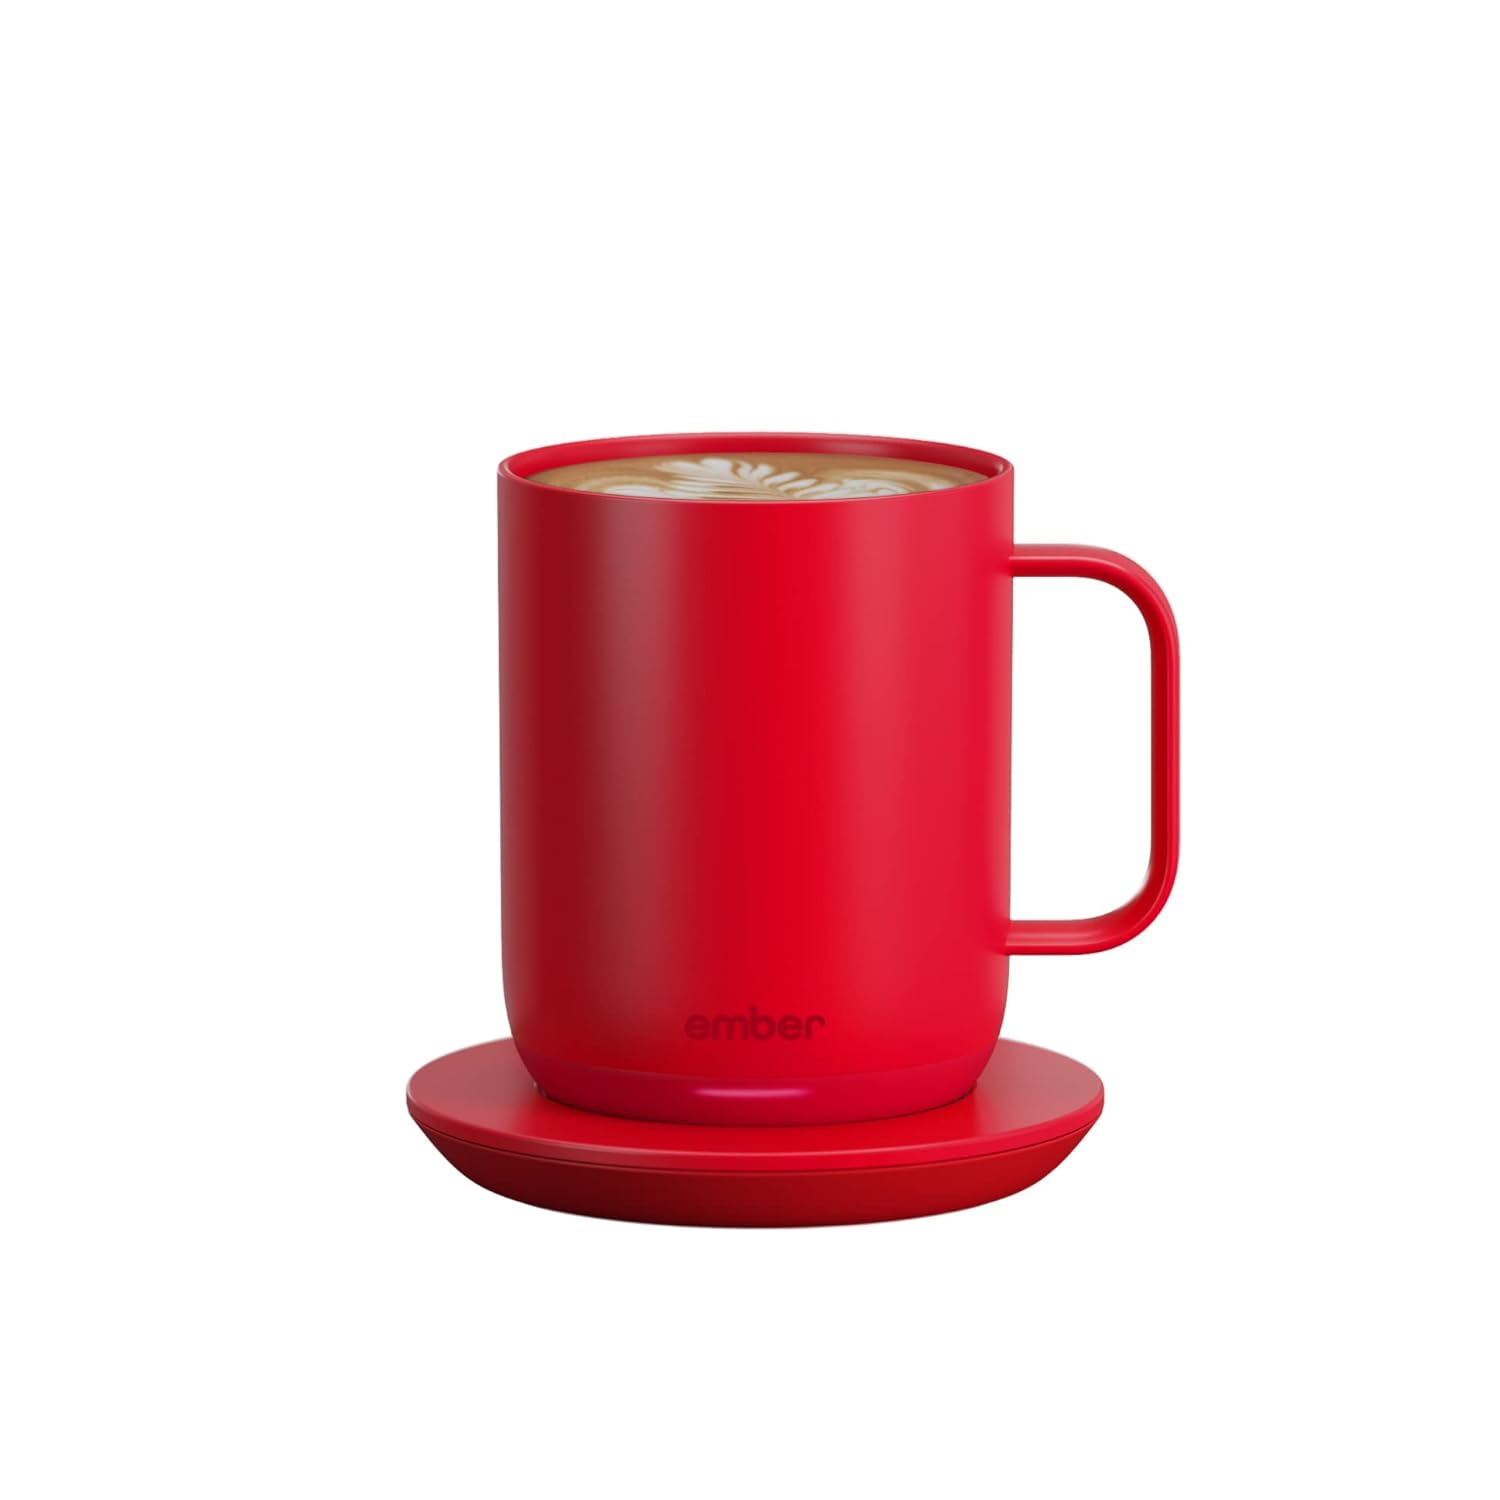 Ember Temperature Control Smart Mug 2, (Product) RED Edition, 14 oz, App Controlled Heated Coffee Mug for Home or Office